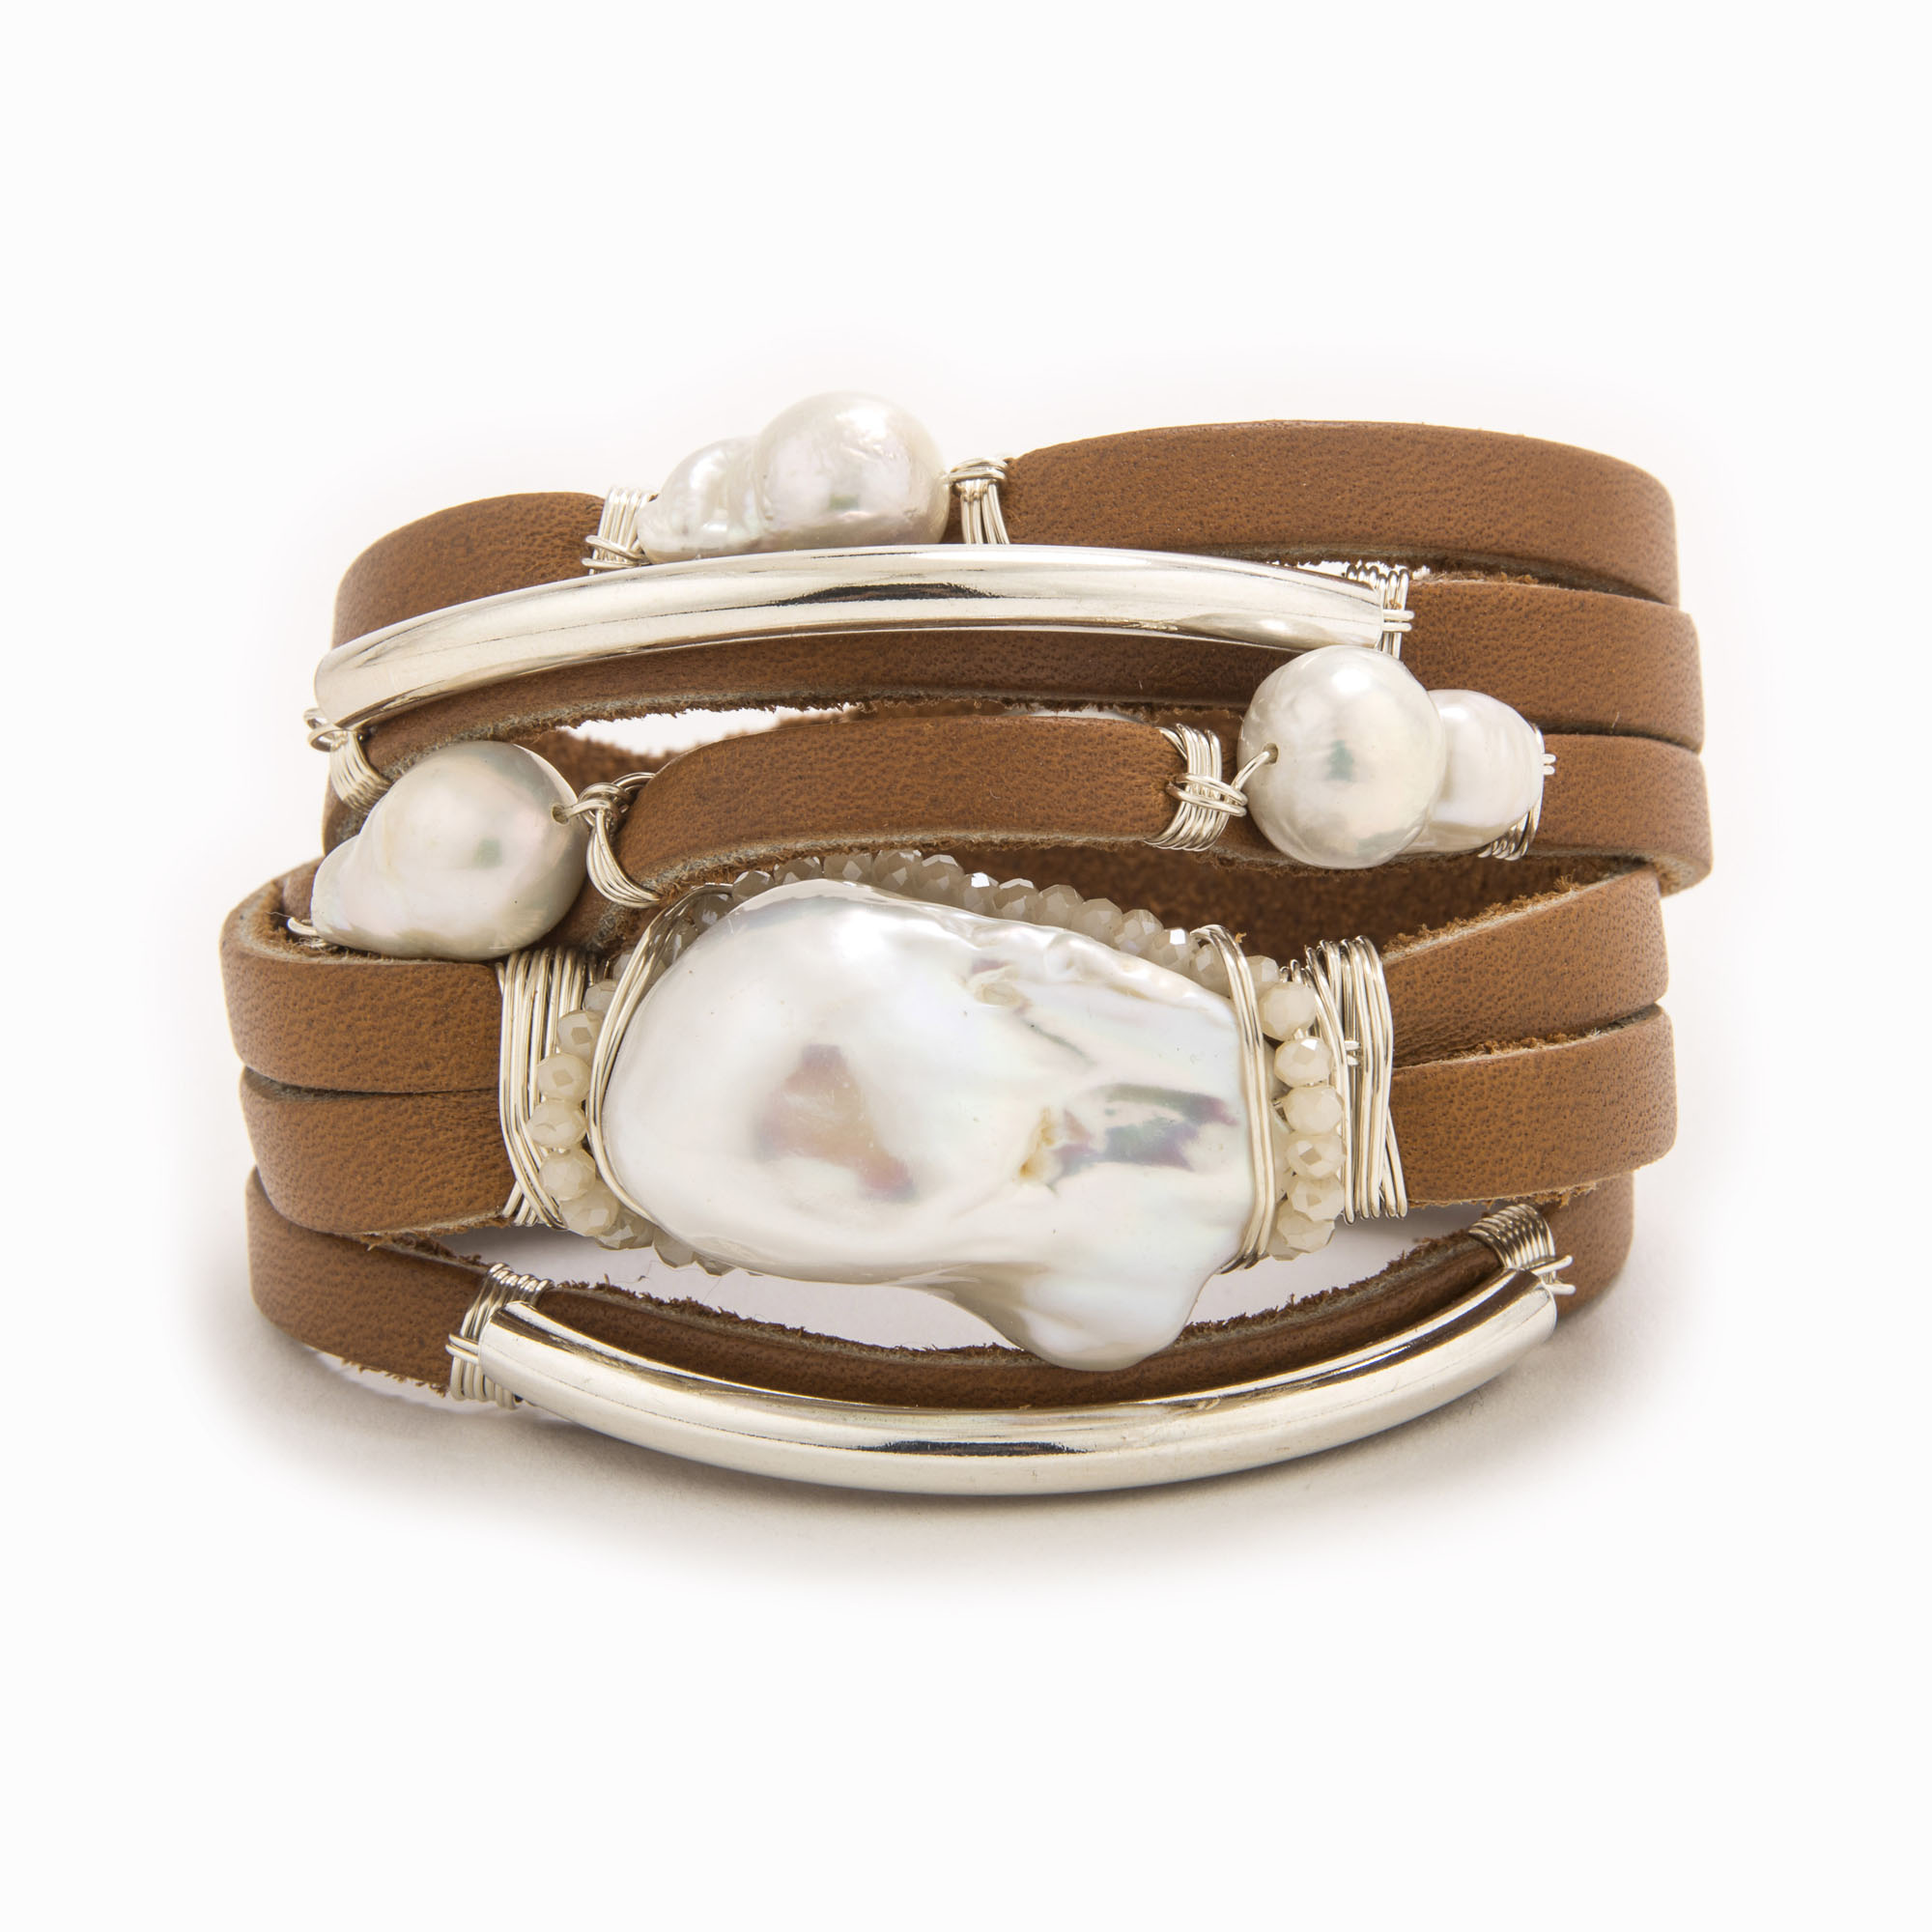 Featured image for “Harriet Leather Shred Bracelet”